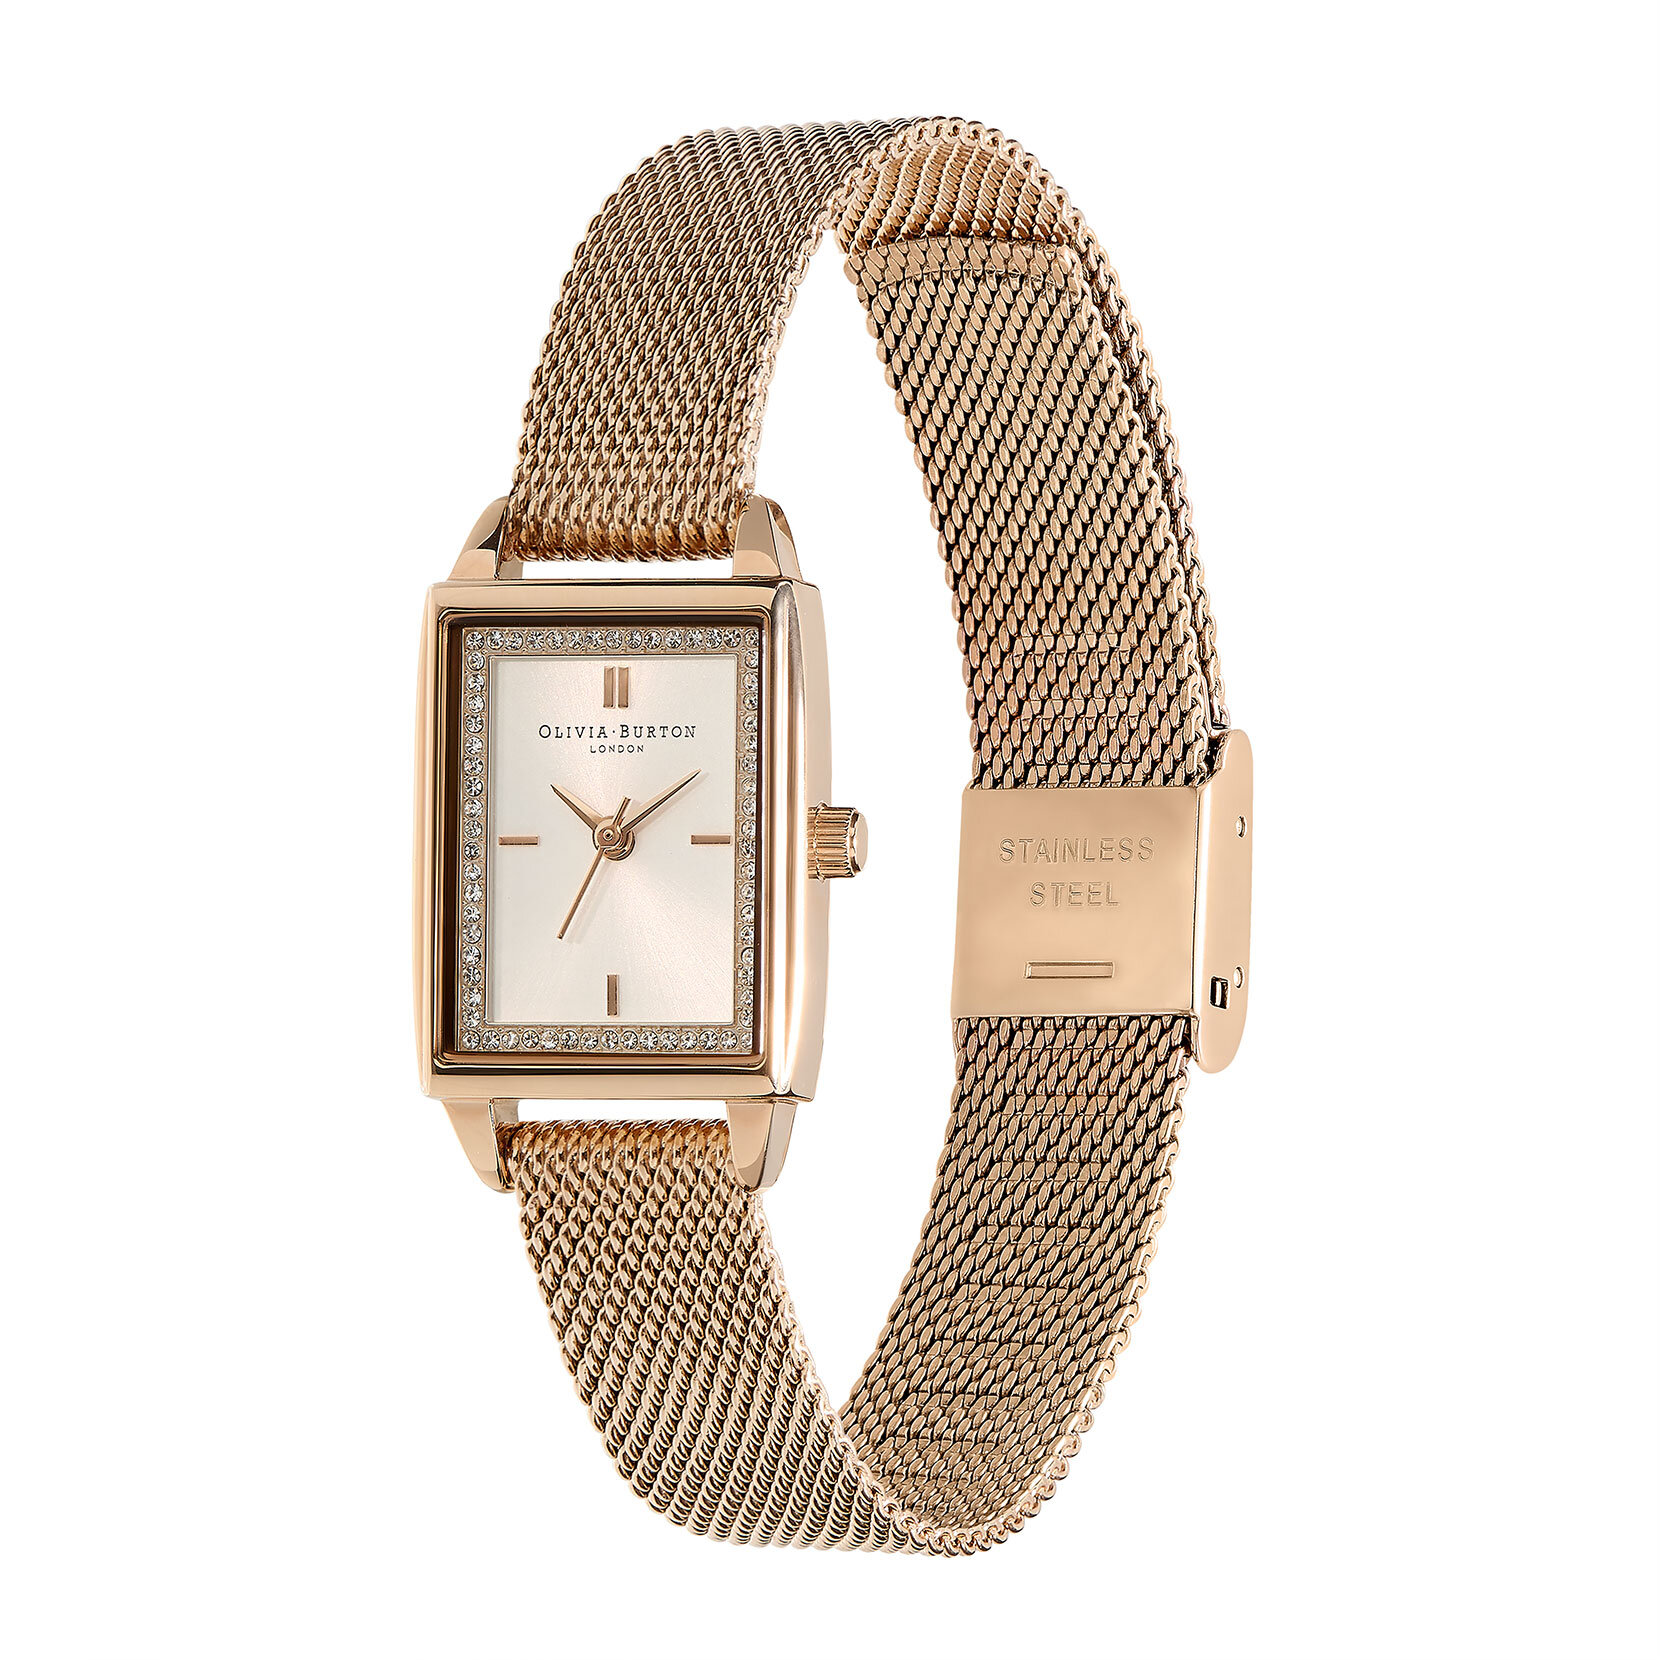 21mm Rectangle White & Carnation Gold Mesh Watch